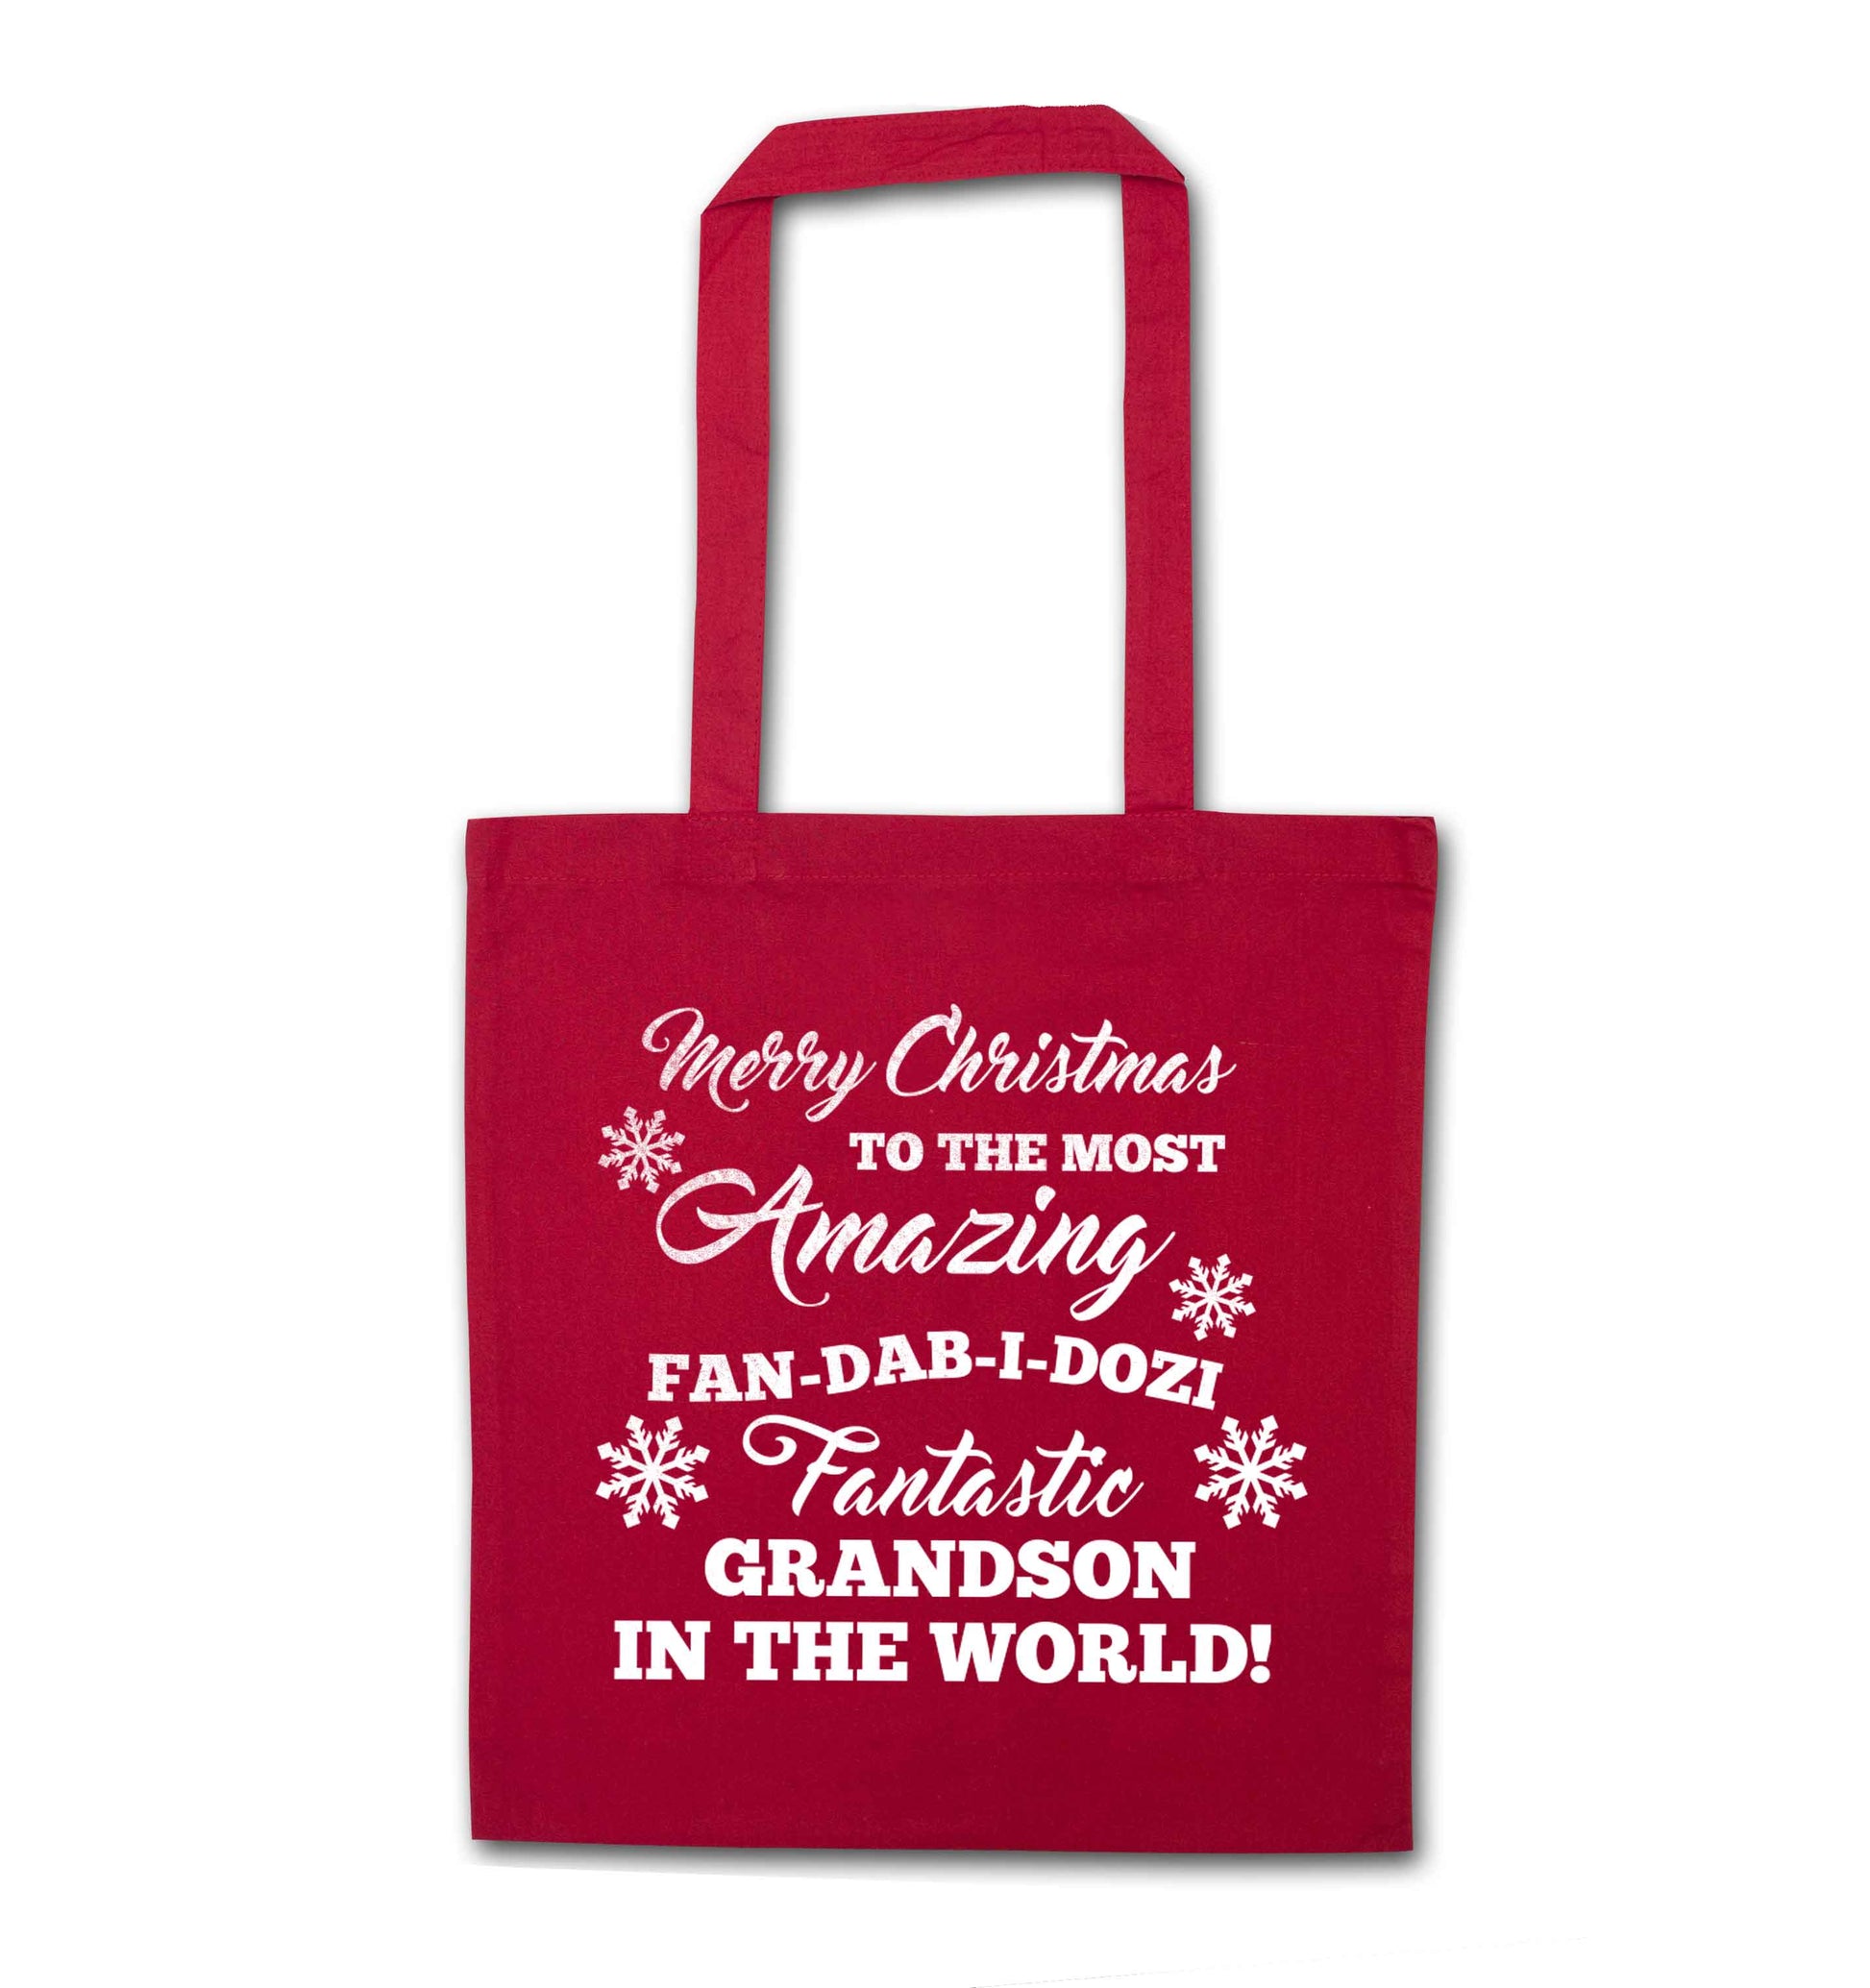 Merry Christmas to the most amazing fan-dab-i-dozi fantasic Grandson in the world red tote bag